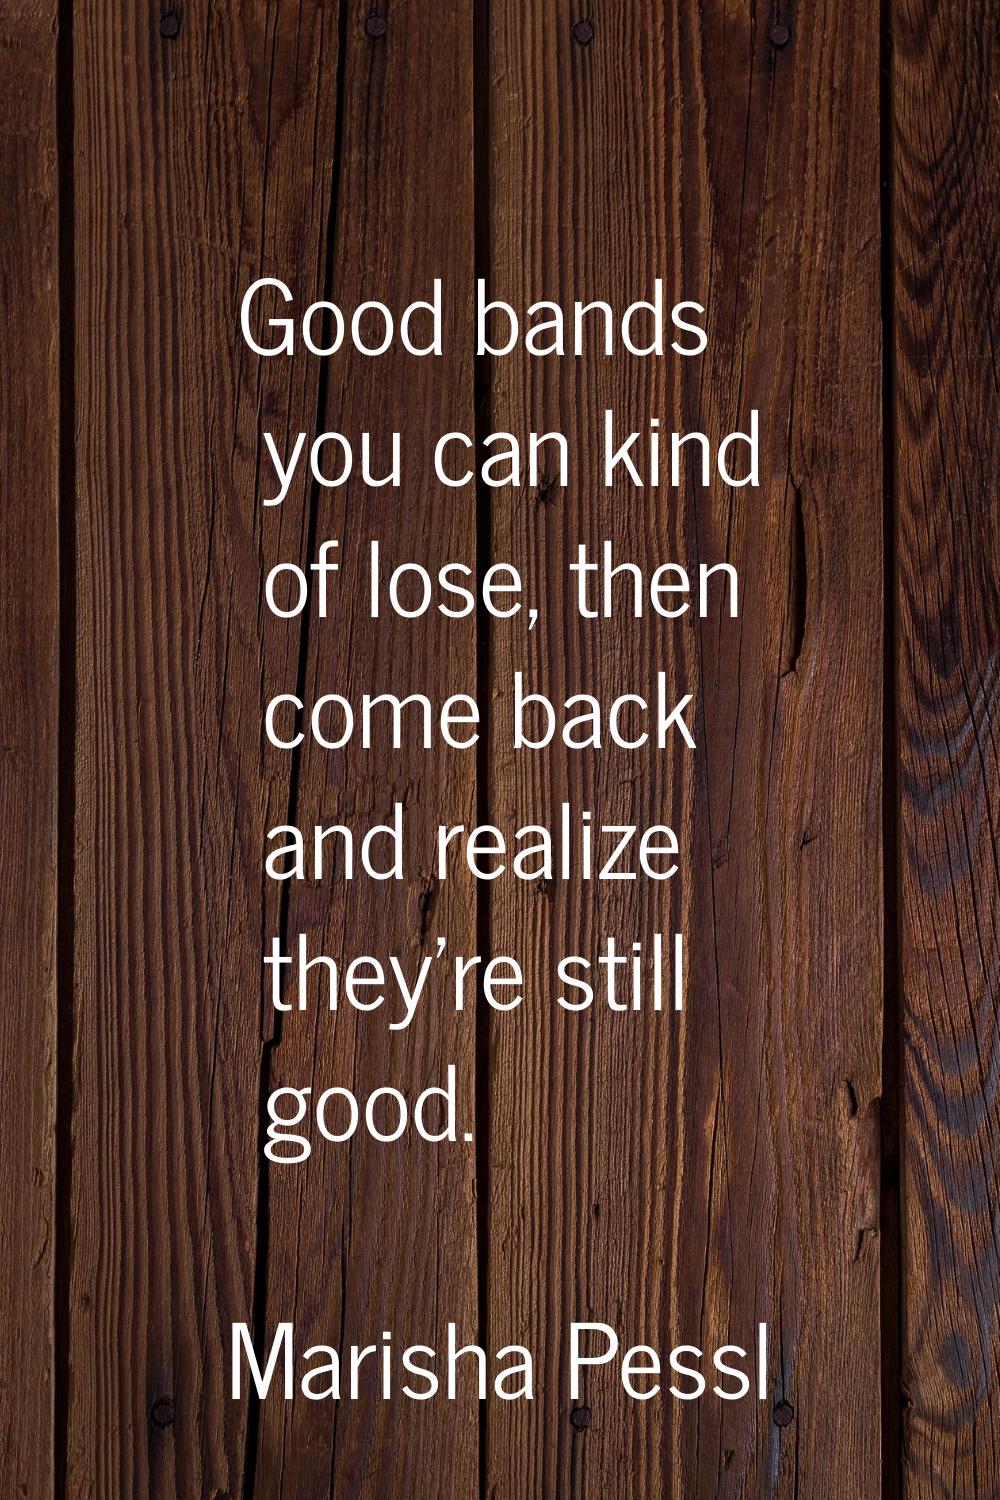 Good bands you can kind of lose, then come back and realize they're still good.